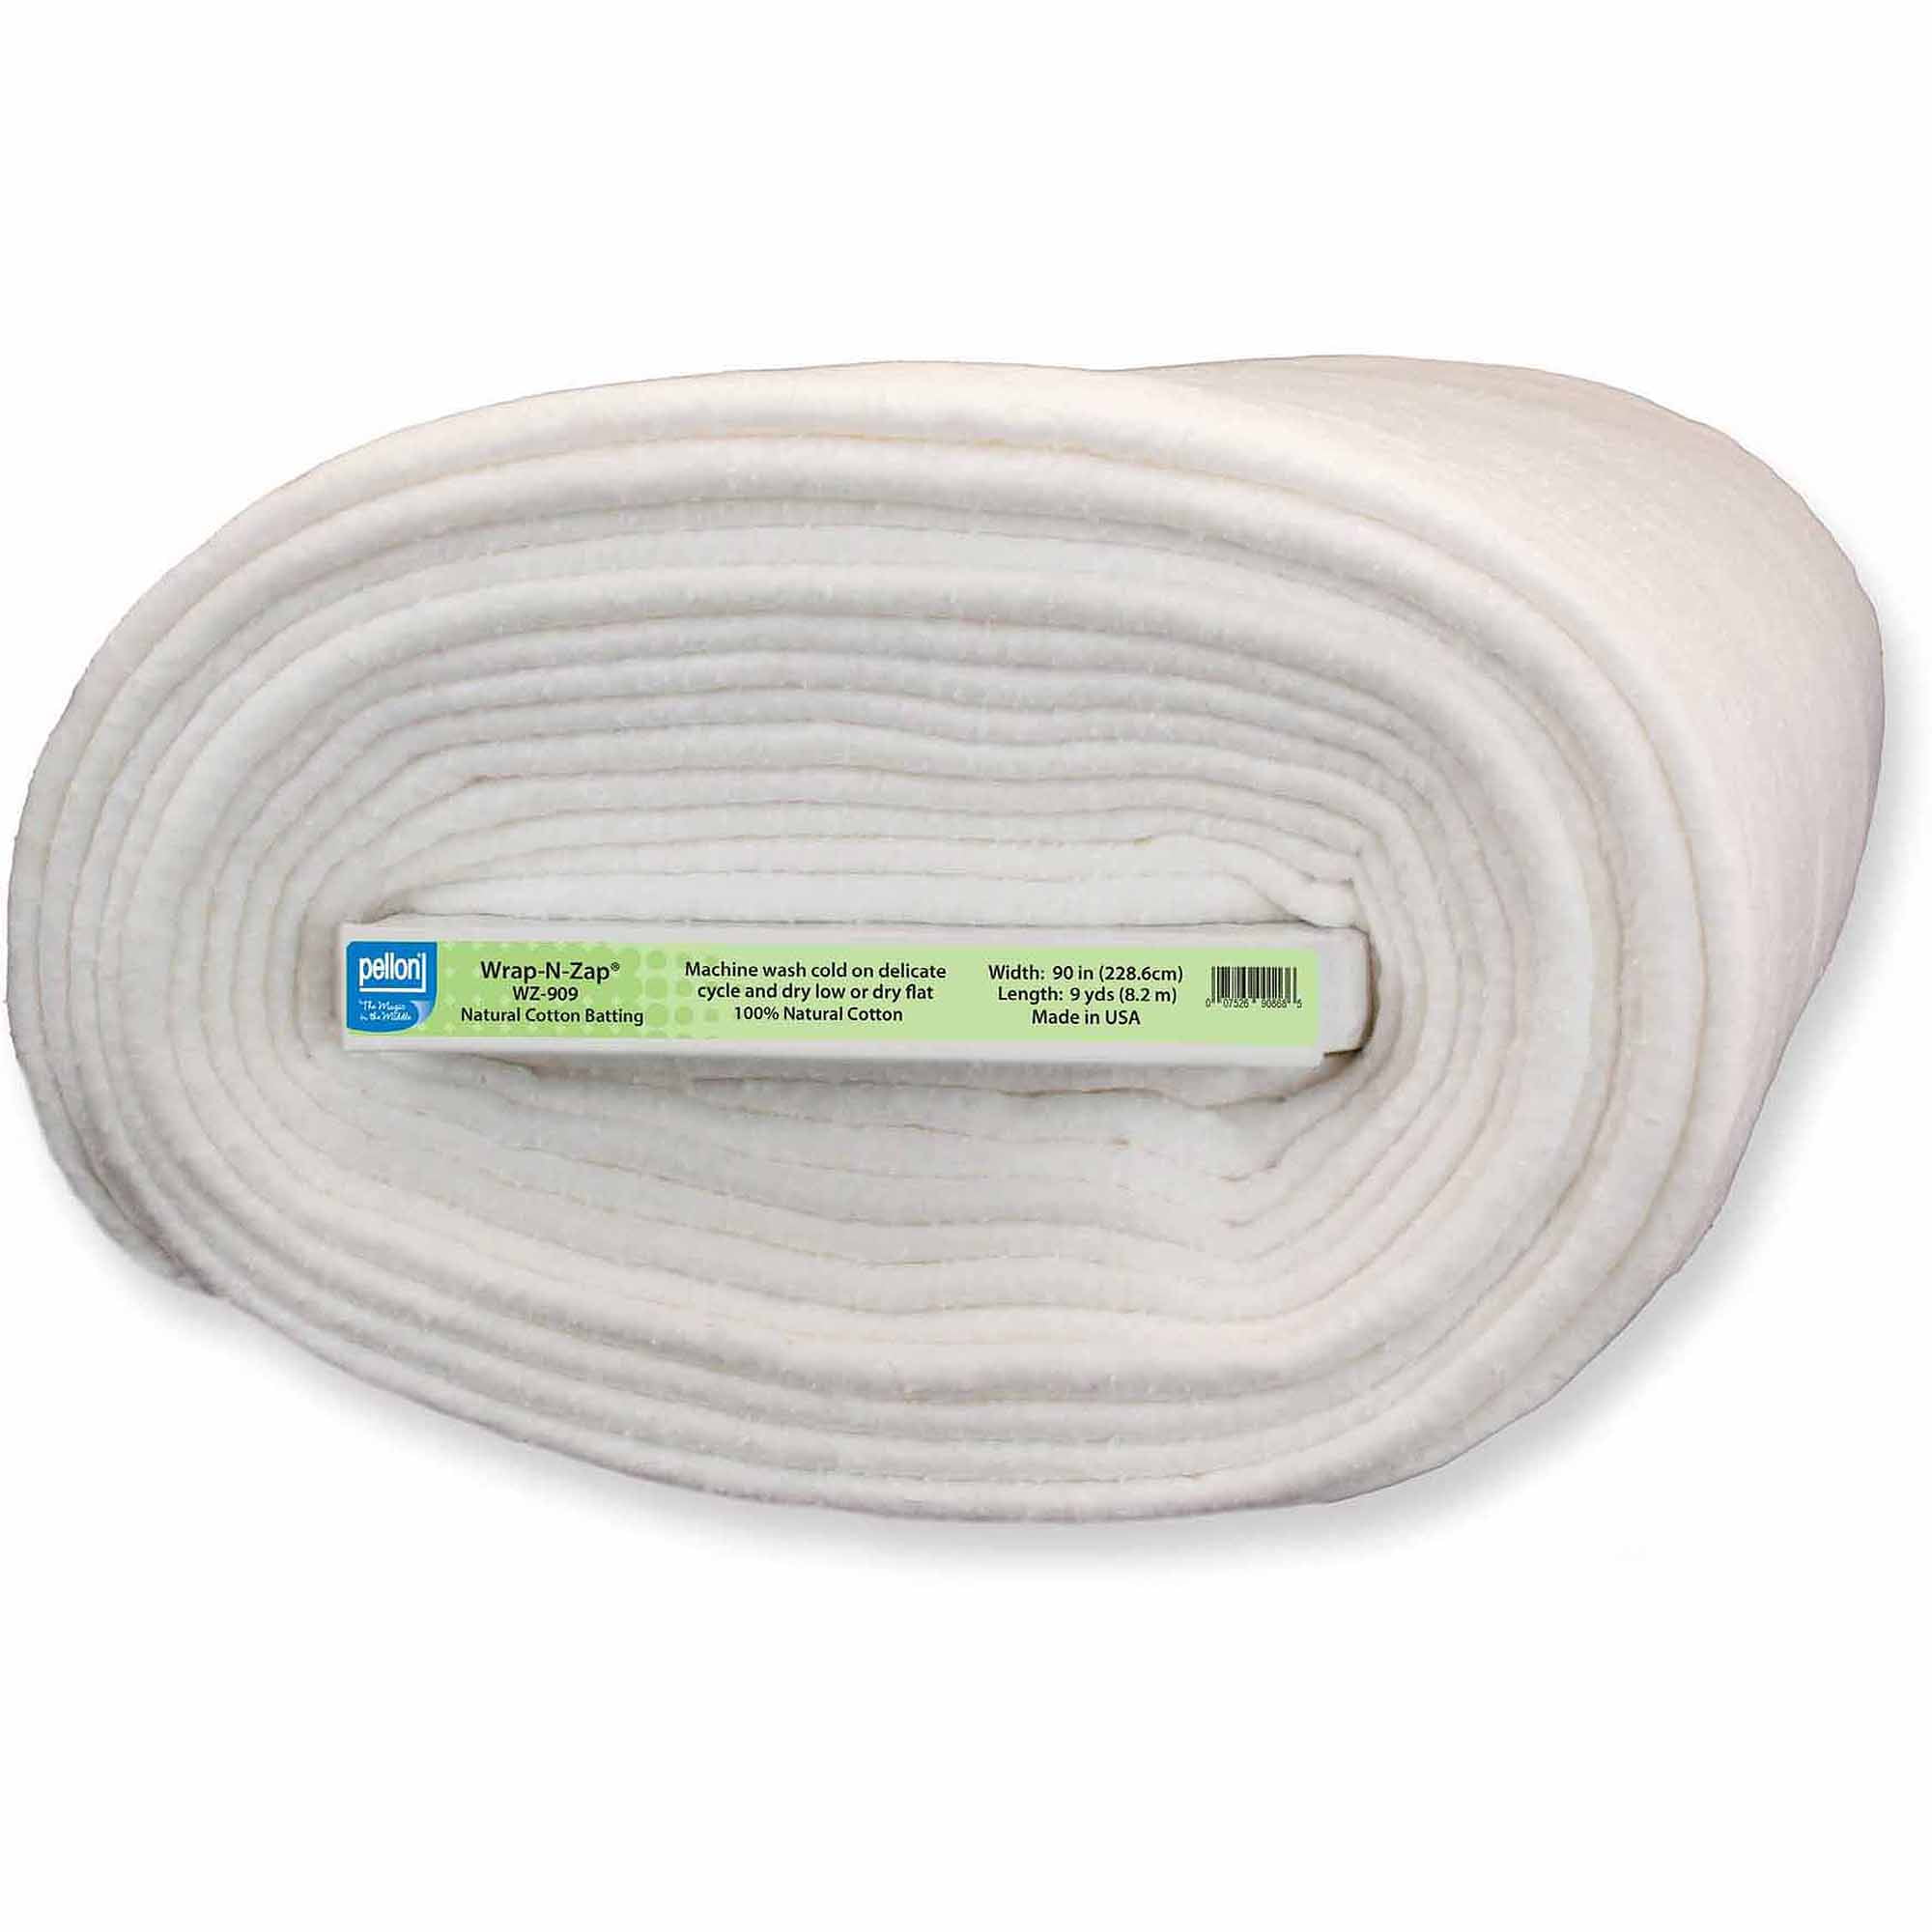 Wadding - Thermo-adhesive cotton nappa for quilting